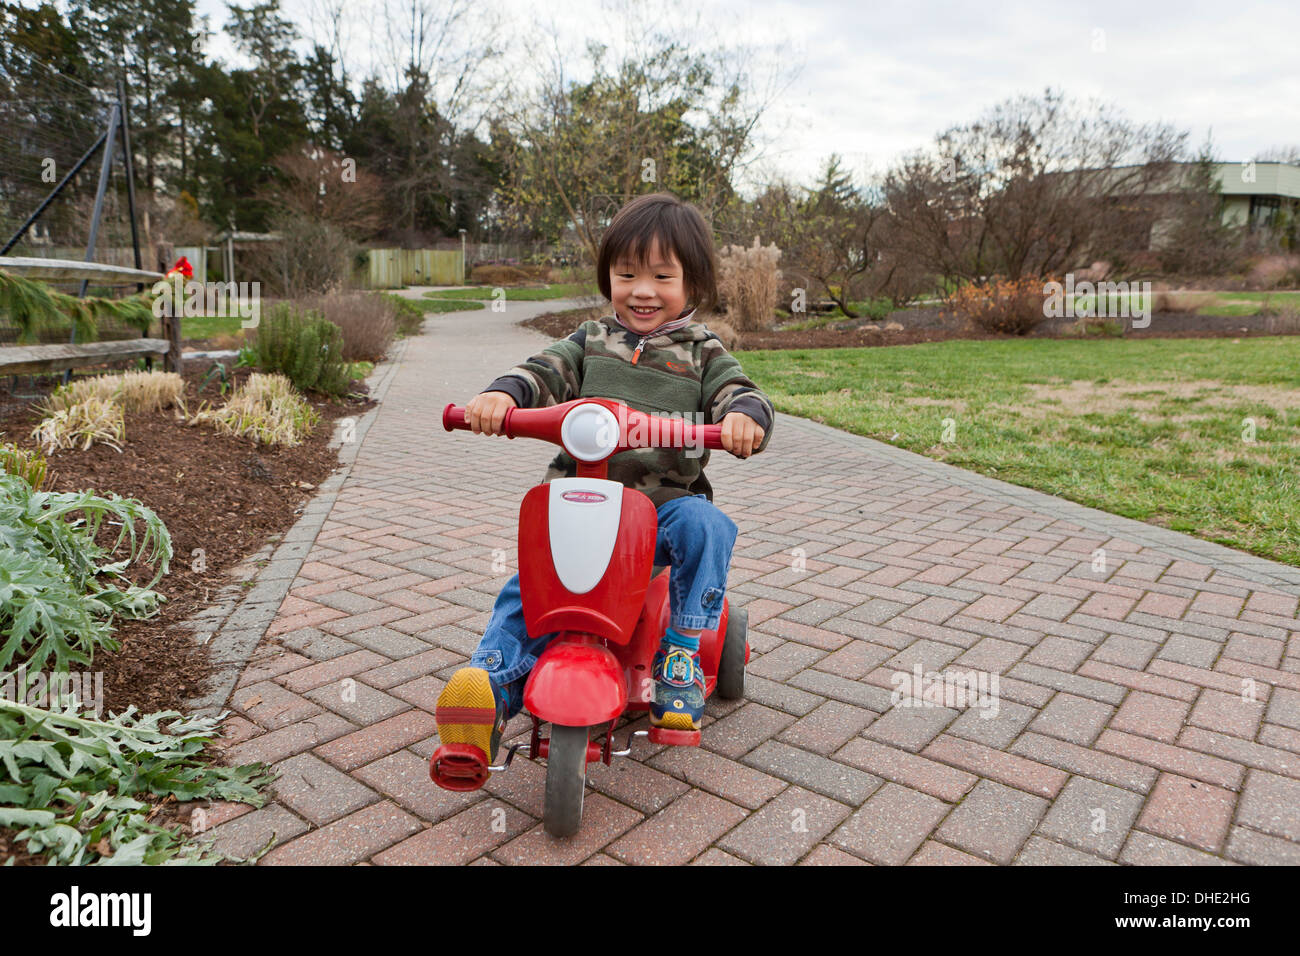 Asian child riding tricycle Radio Flyer Banque D'Images